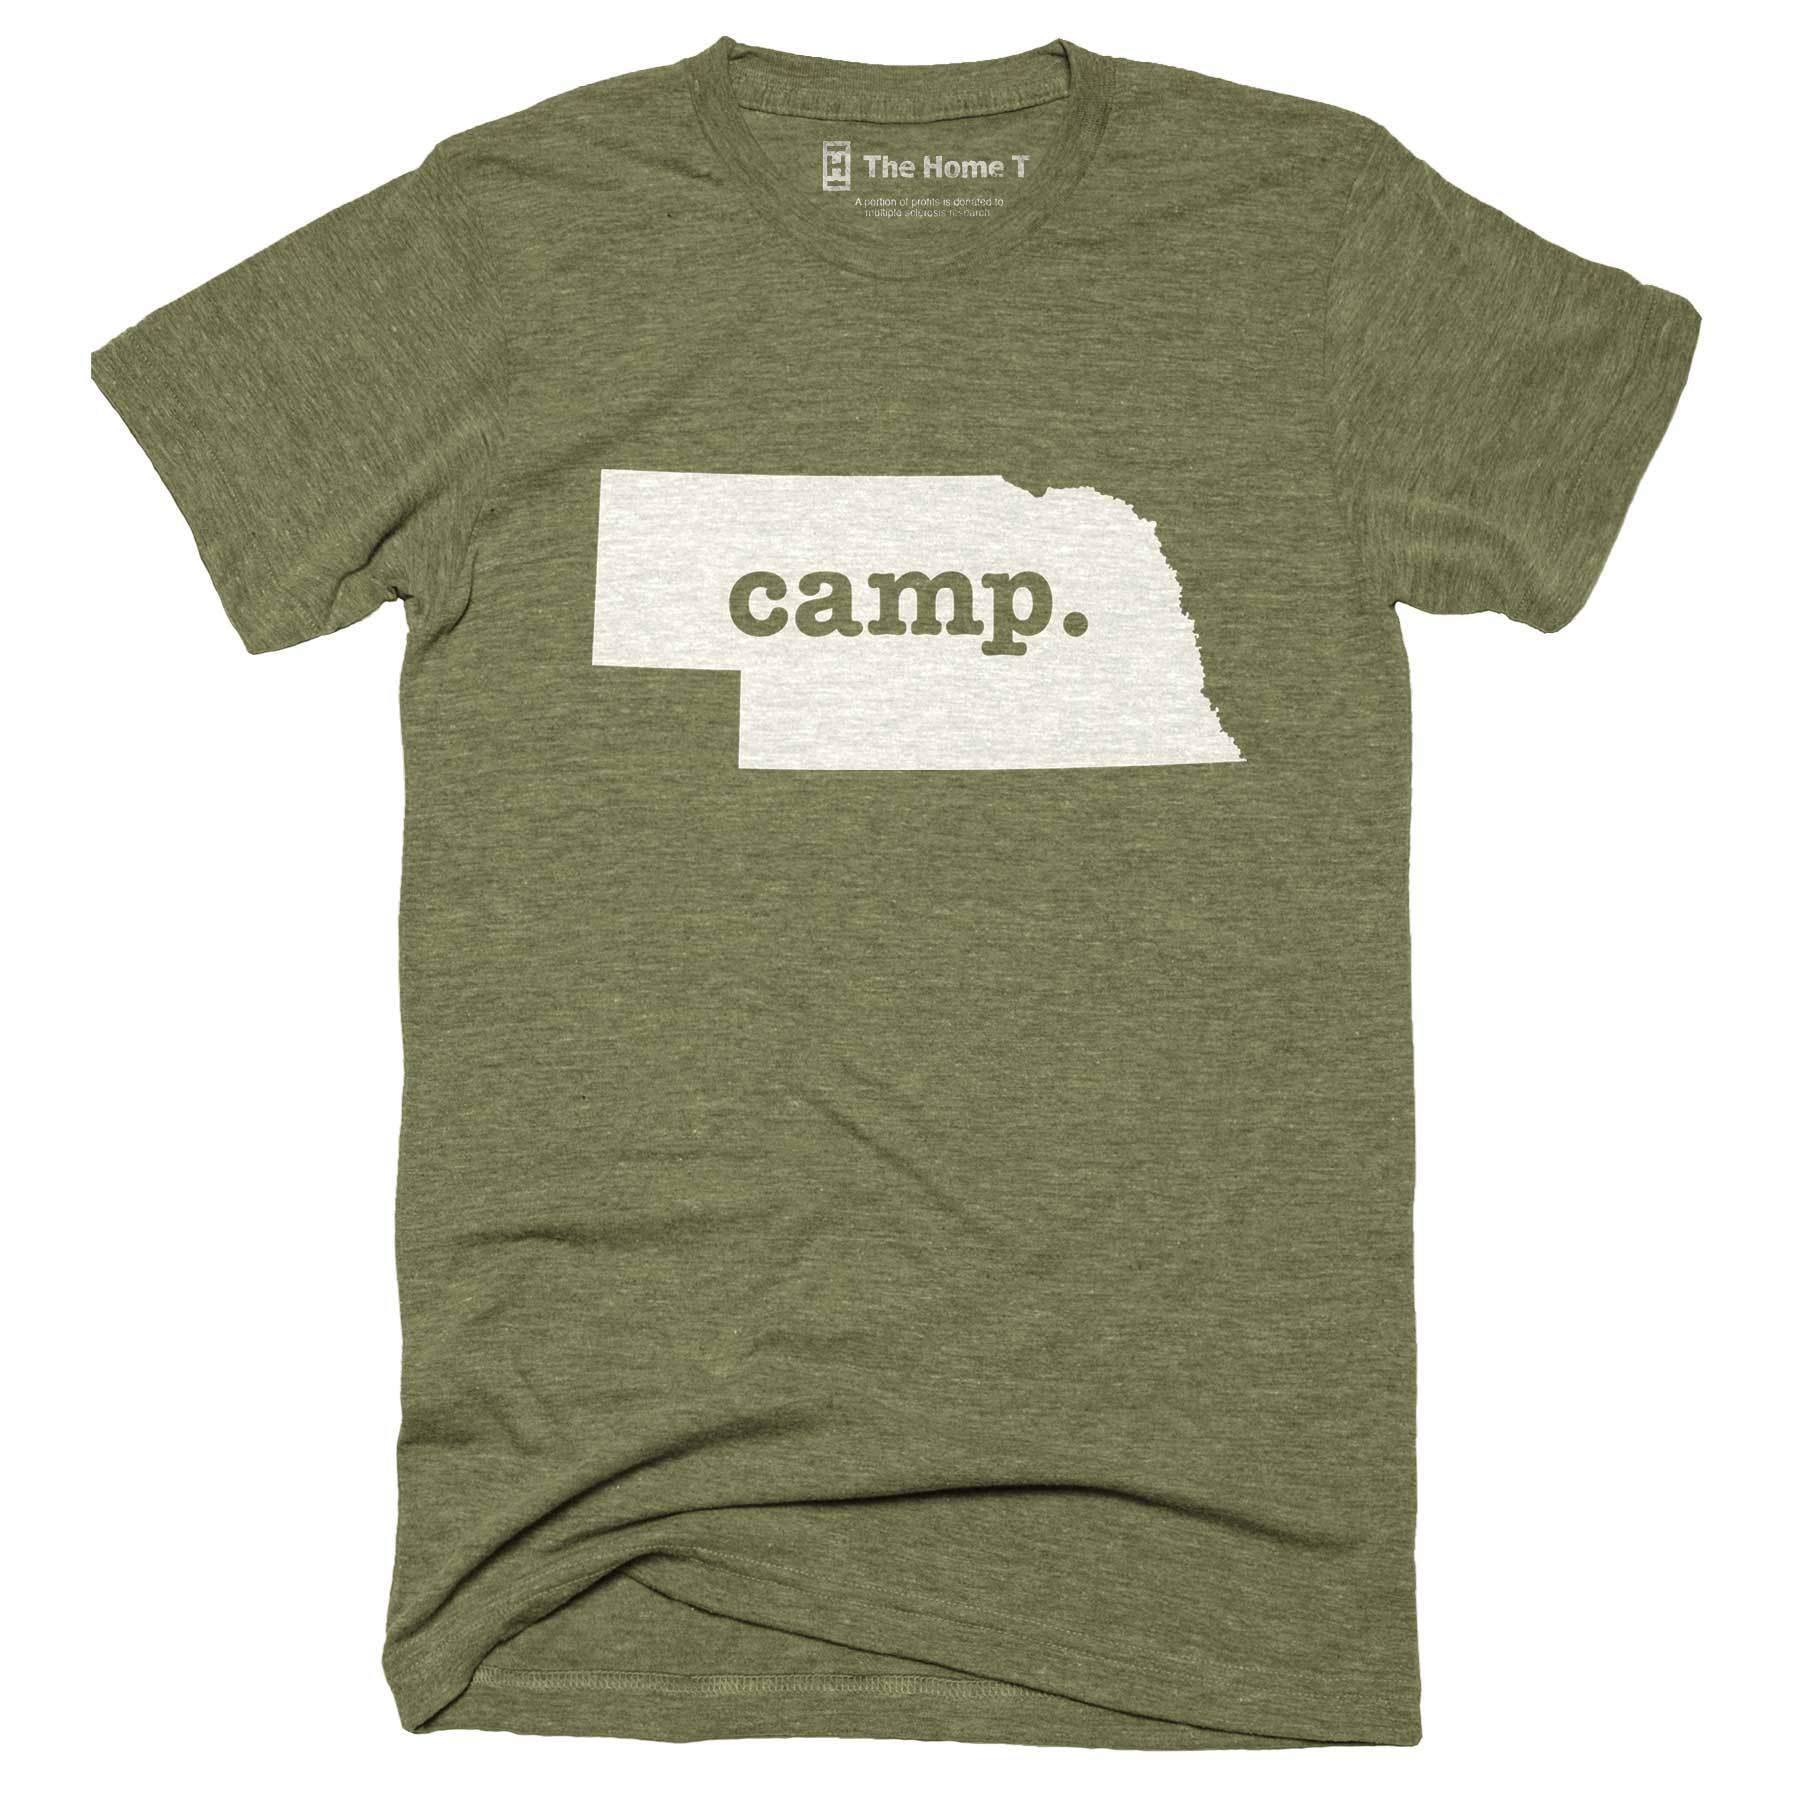 Nebraska Camp Home T-Shirt Outdoor Collection The Home T XXL Army Green